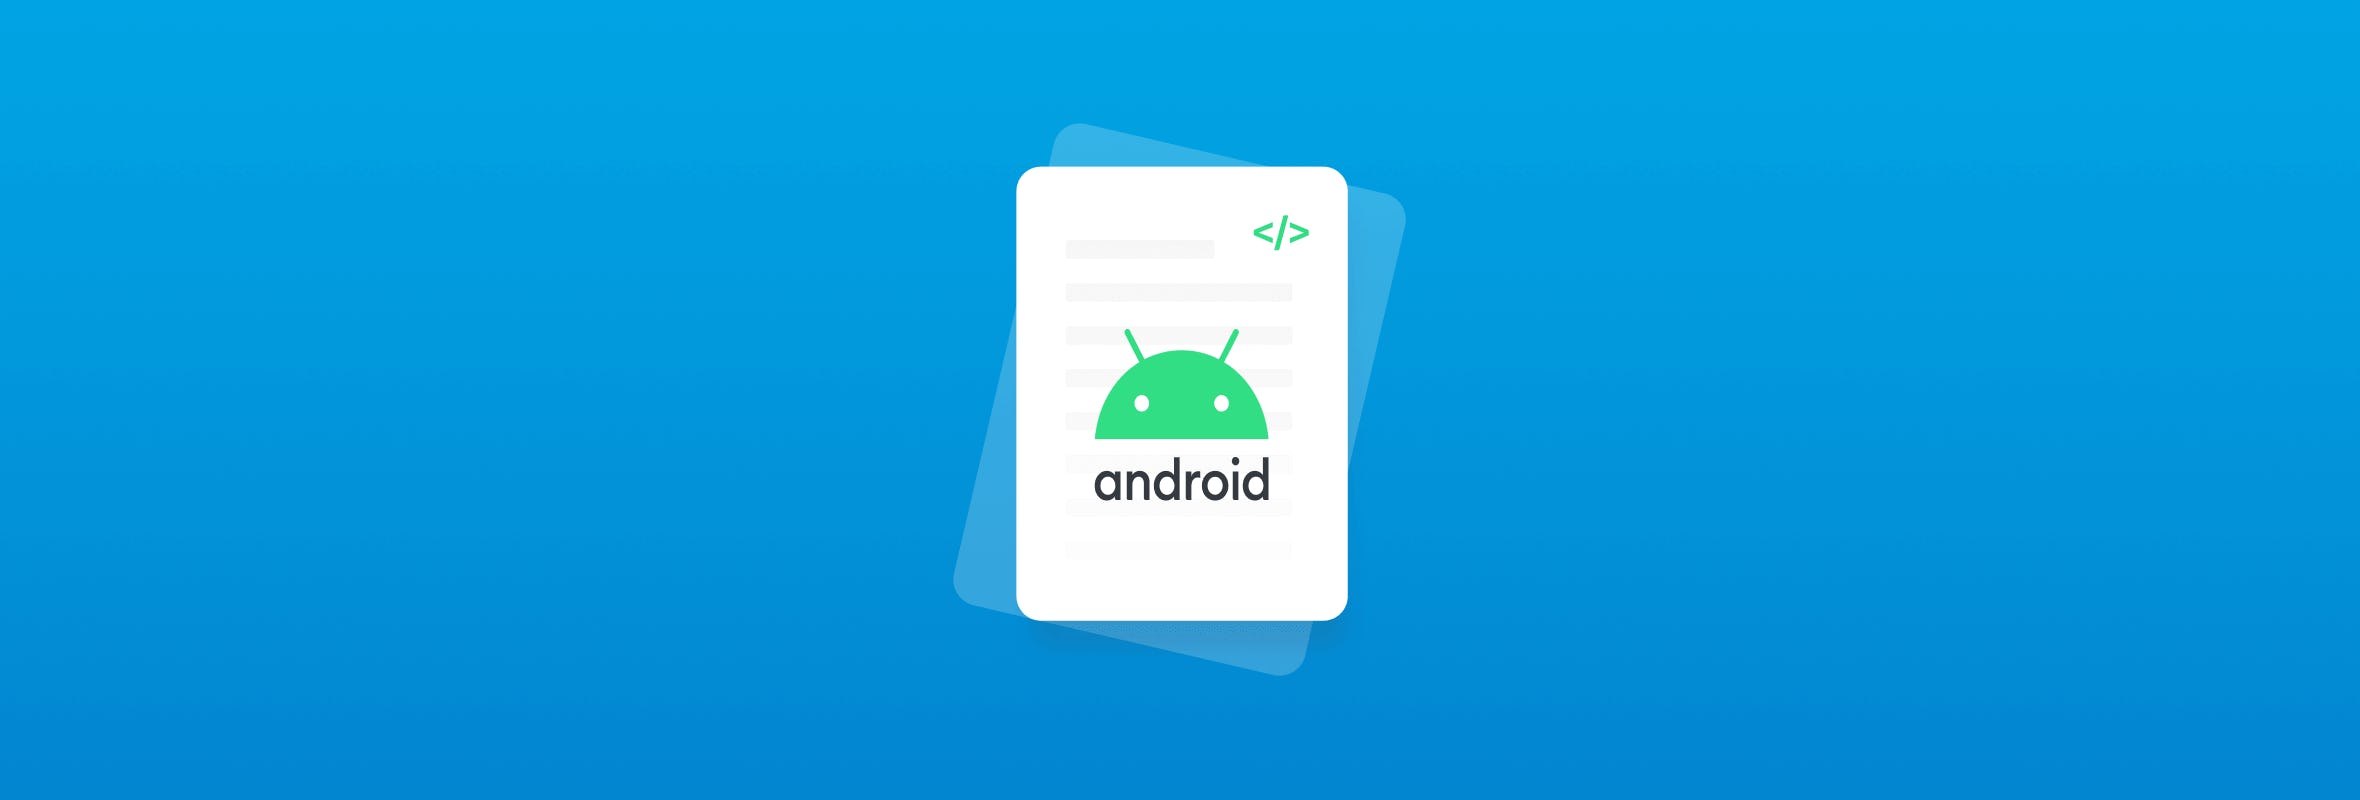 Android blog banner hero image